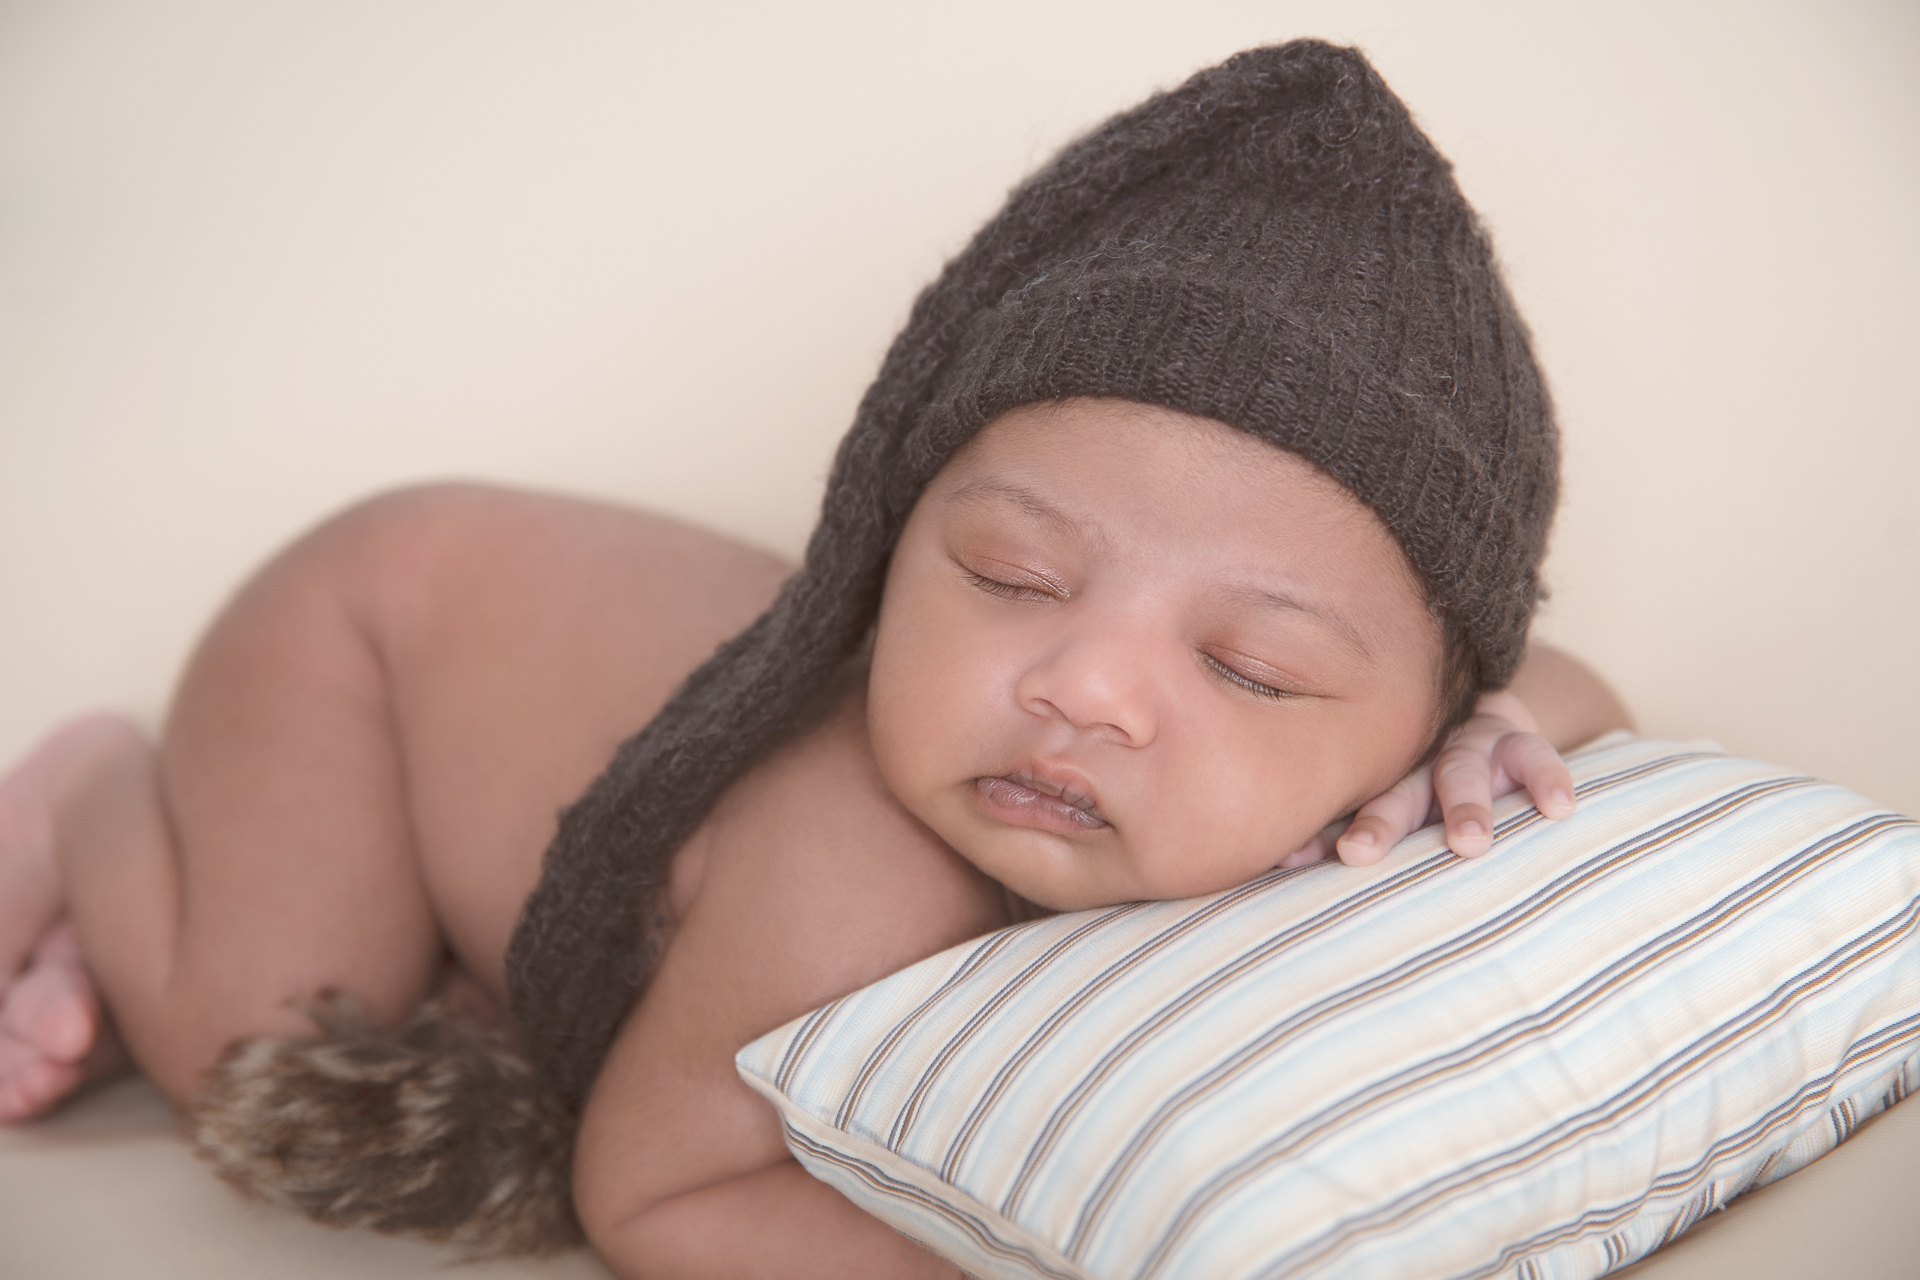 Newborn baby wearing brown hat rests on a small pillow.